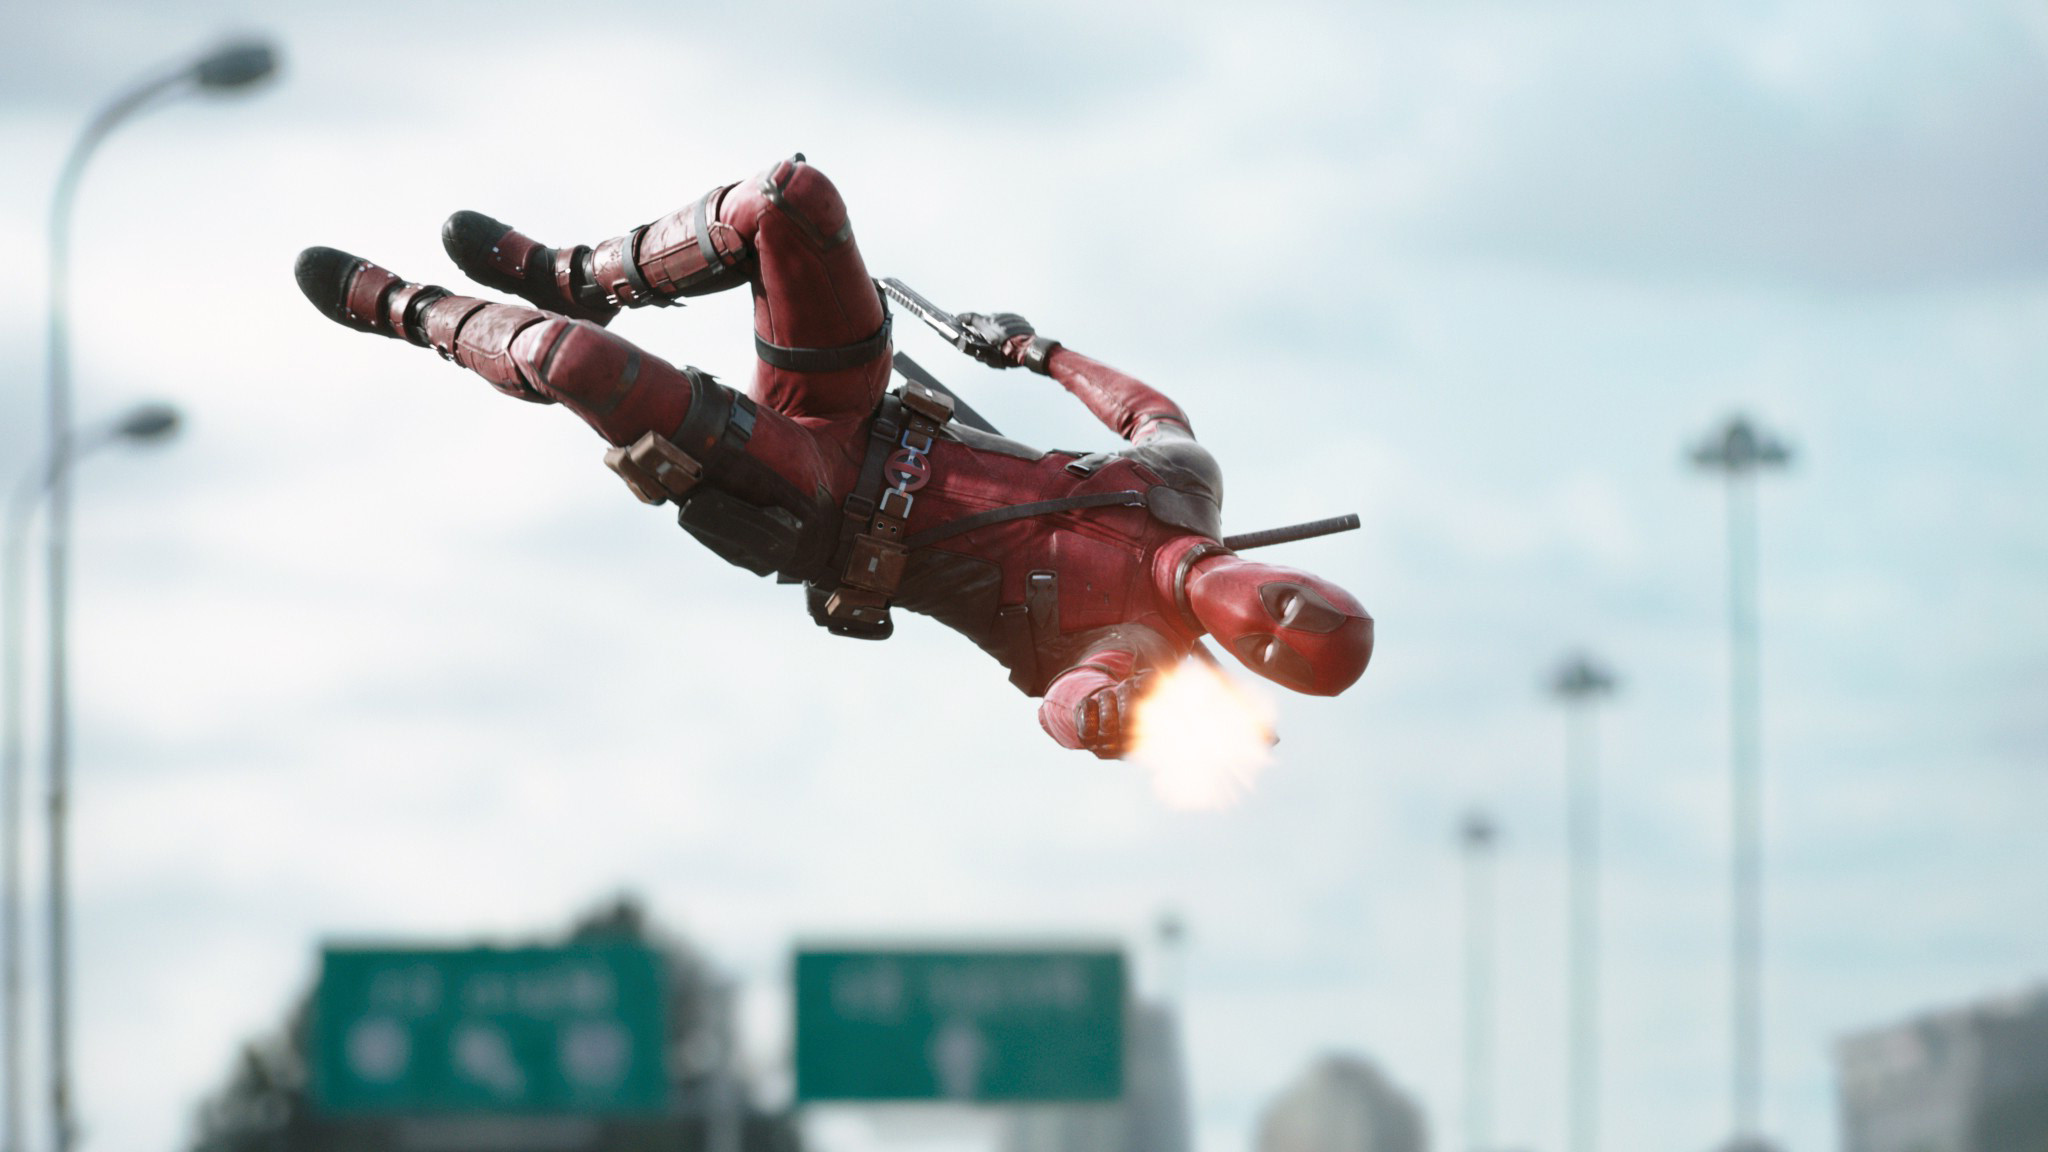 2048x1152 Deadpool Movie 2016 Wallpaper : HD Wallpapers available in different  resolution and sizes for our computer desktop backgrounds, laptop & mobile  phones.